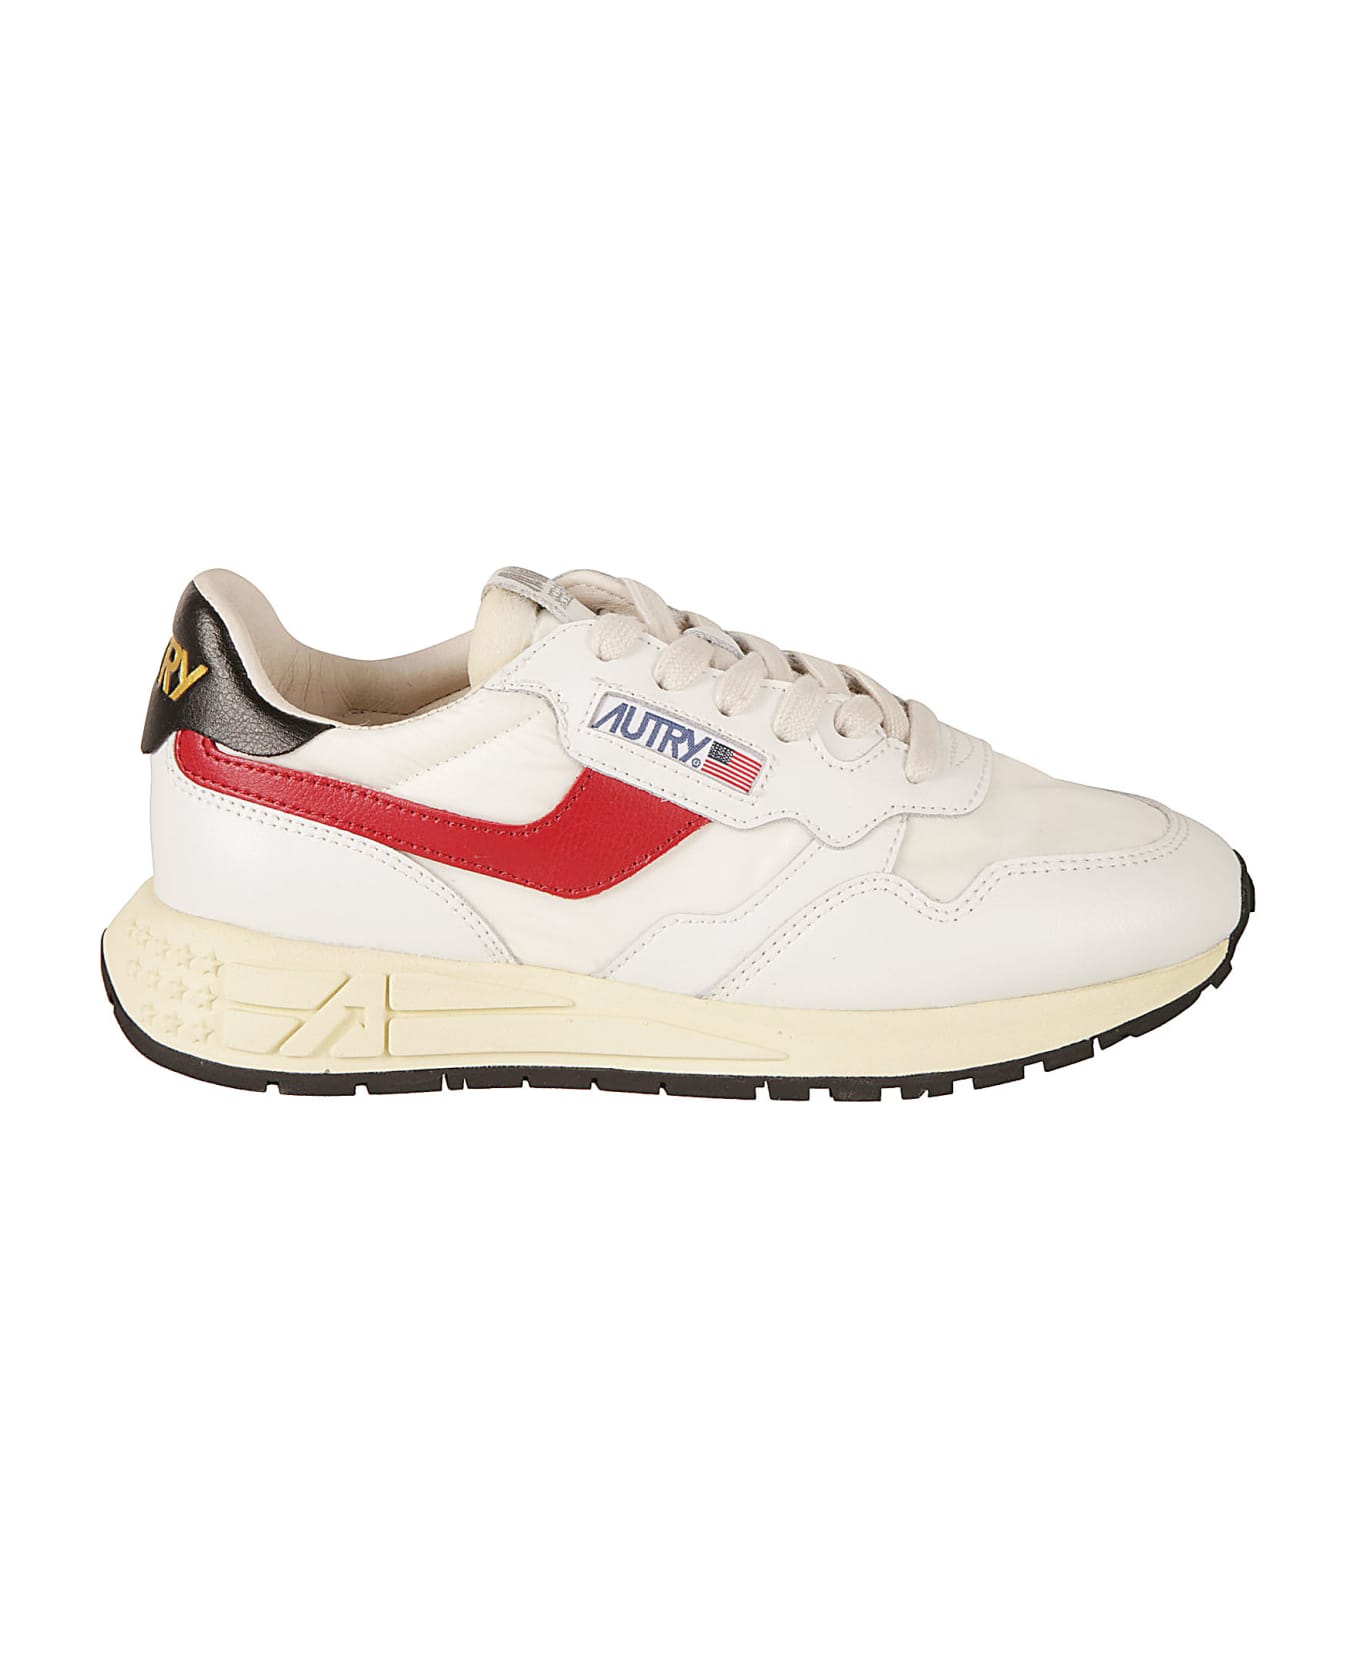 Autry Logo Patched Sneakers - White/Red